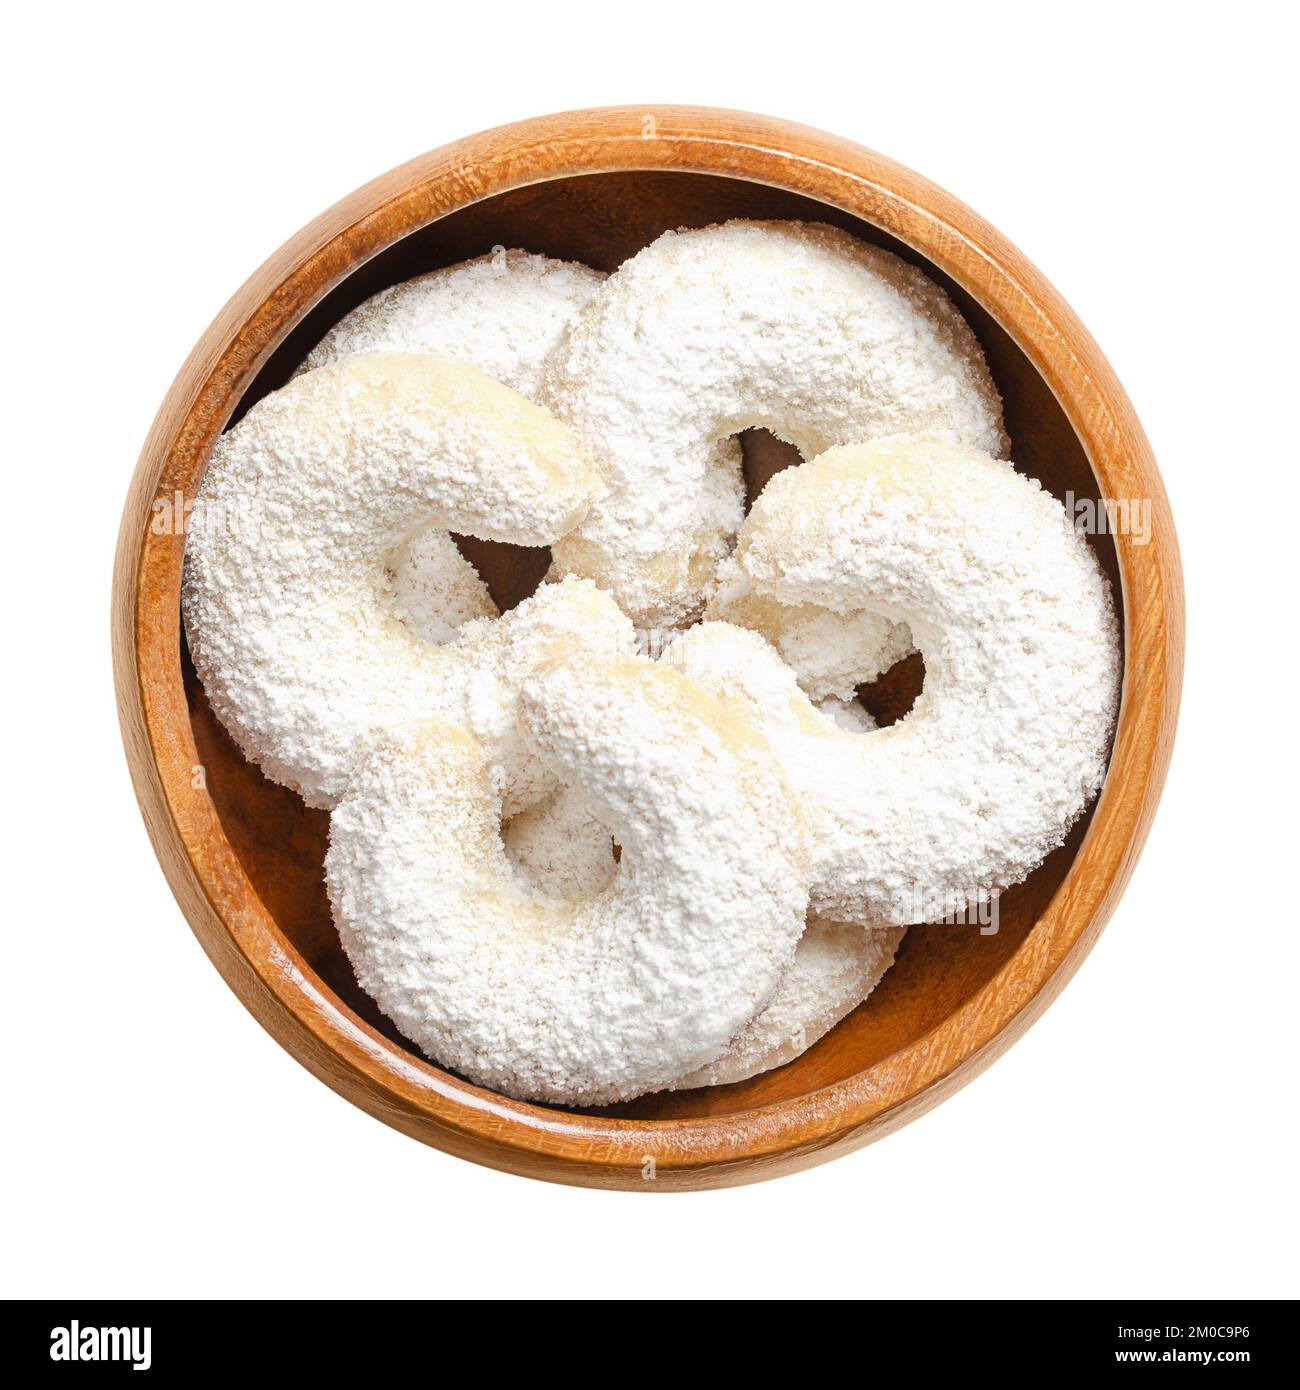 Vanilla crescents, Vanillekipferl in a wooden bowl. Crescent shaped Christmas biscuits, originally from Austria. Stock Photo